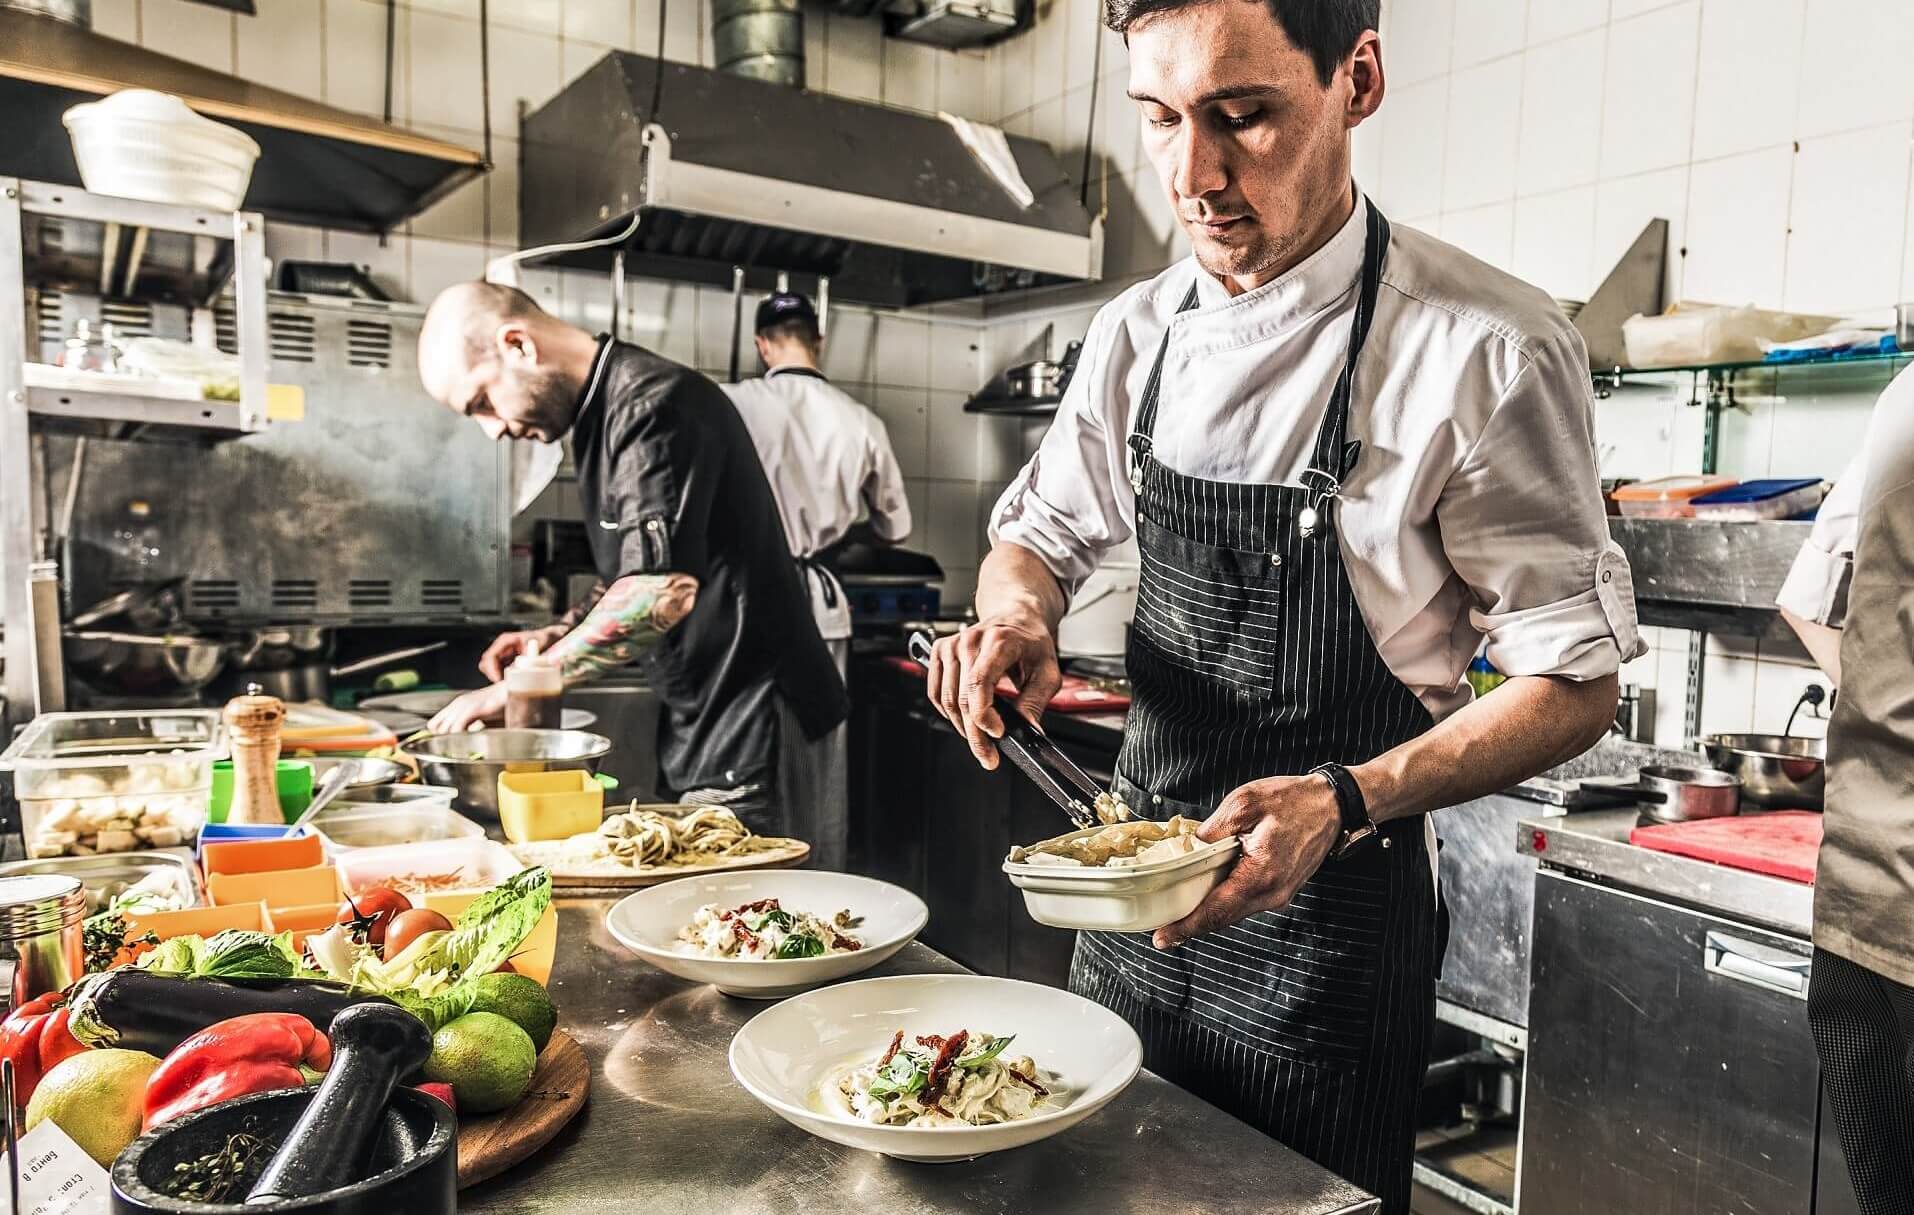 Long days are common in the gastronomy - the work-life-balance often seems to be neglected